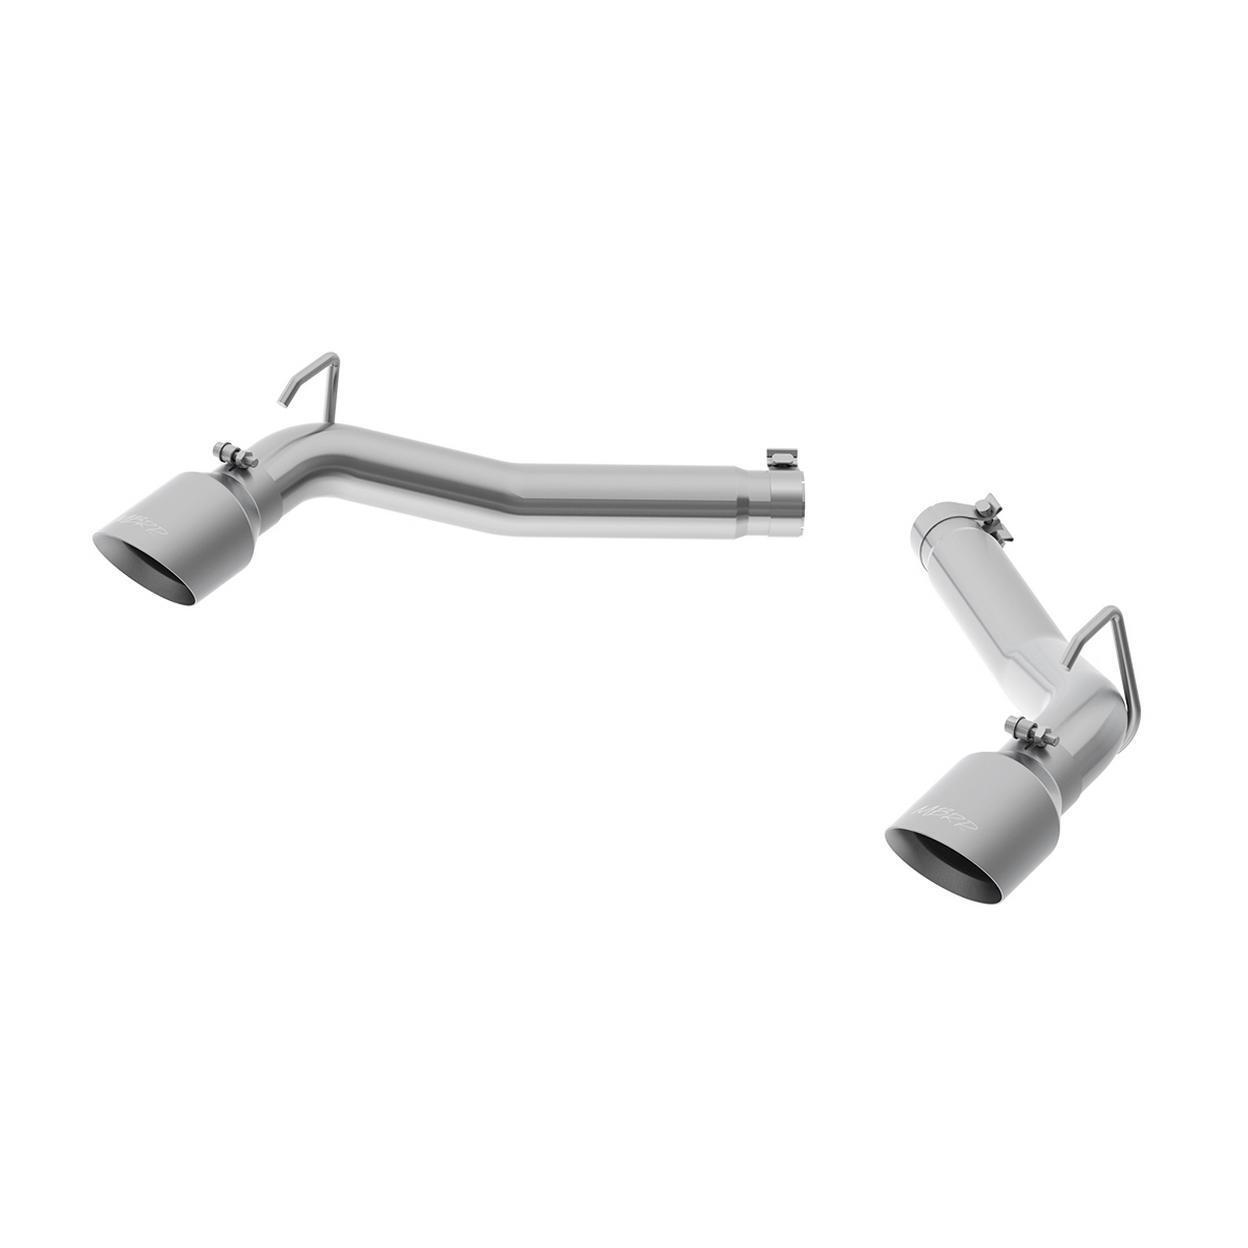 MBRP Exhaust S7019AL-AX Exhaust System Kit for 2013-2014 Chevrolet Camaro